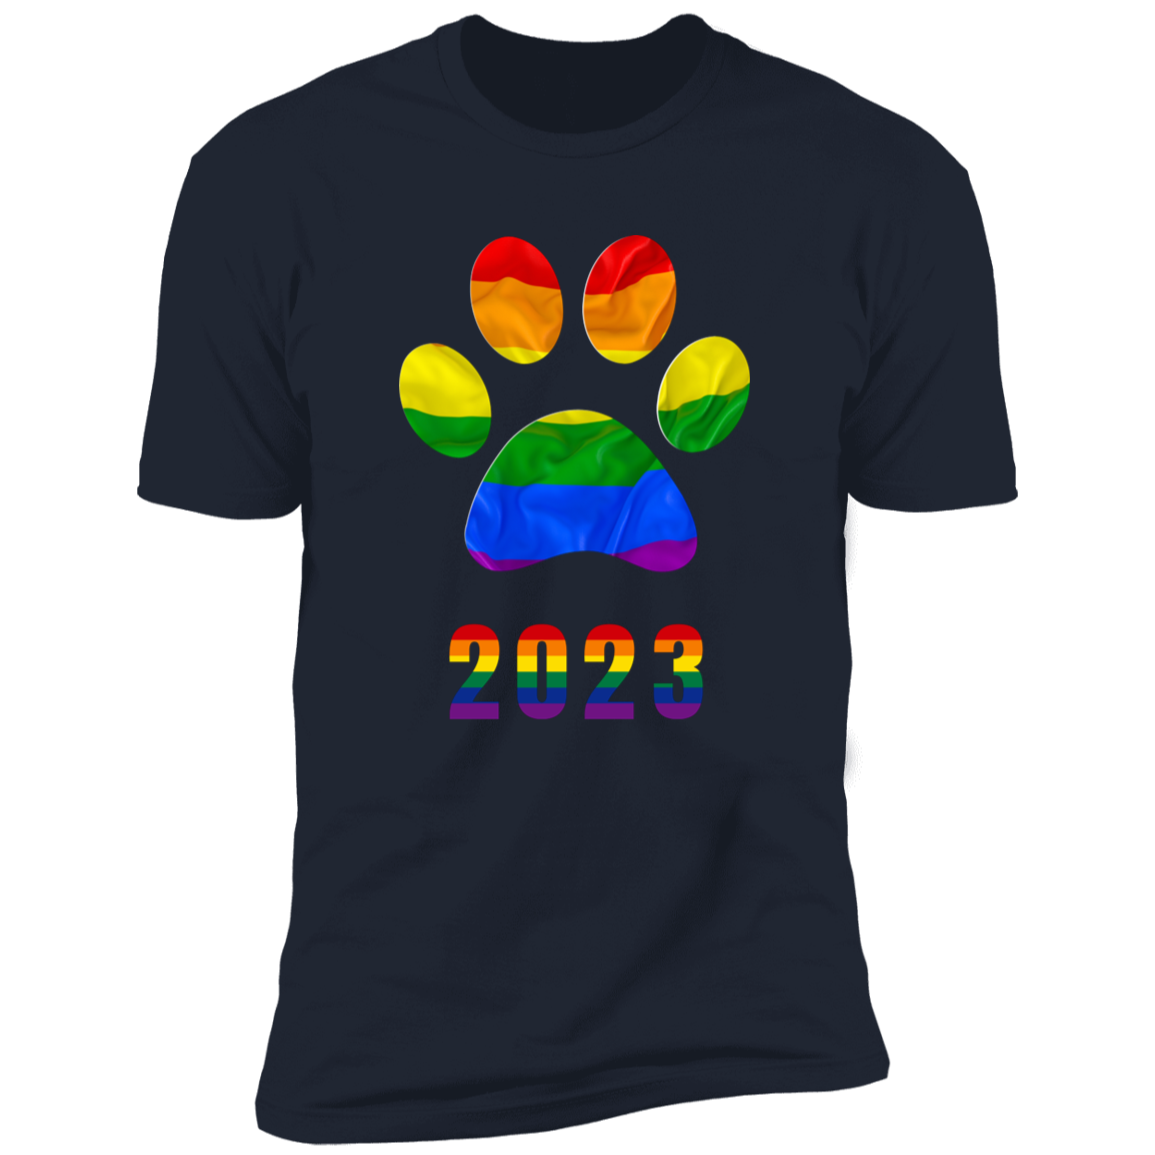 Pride Paw 2023 (Flag) Pride T-shirt, Paw Pride Dog Shirt for humans, in navy blue